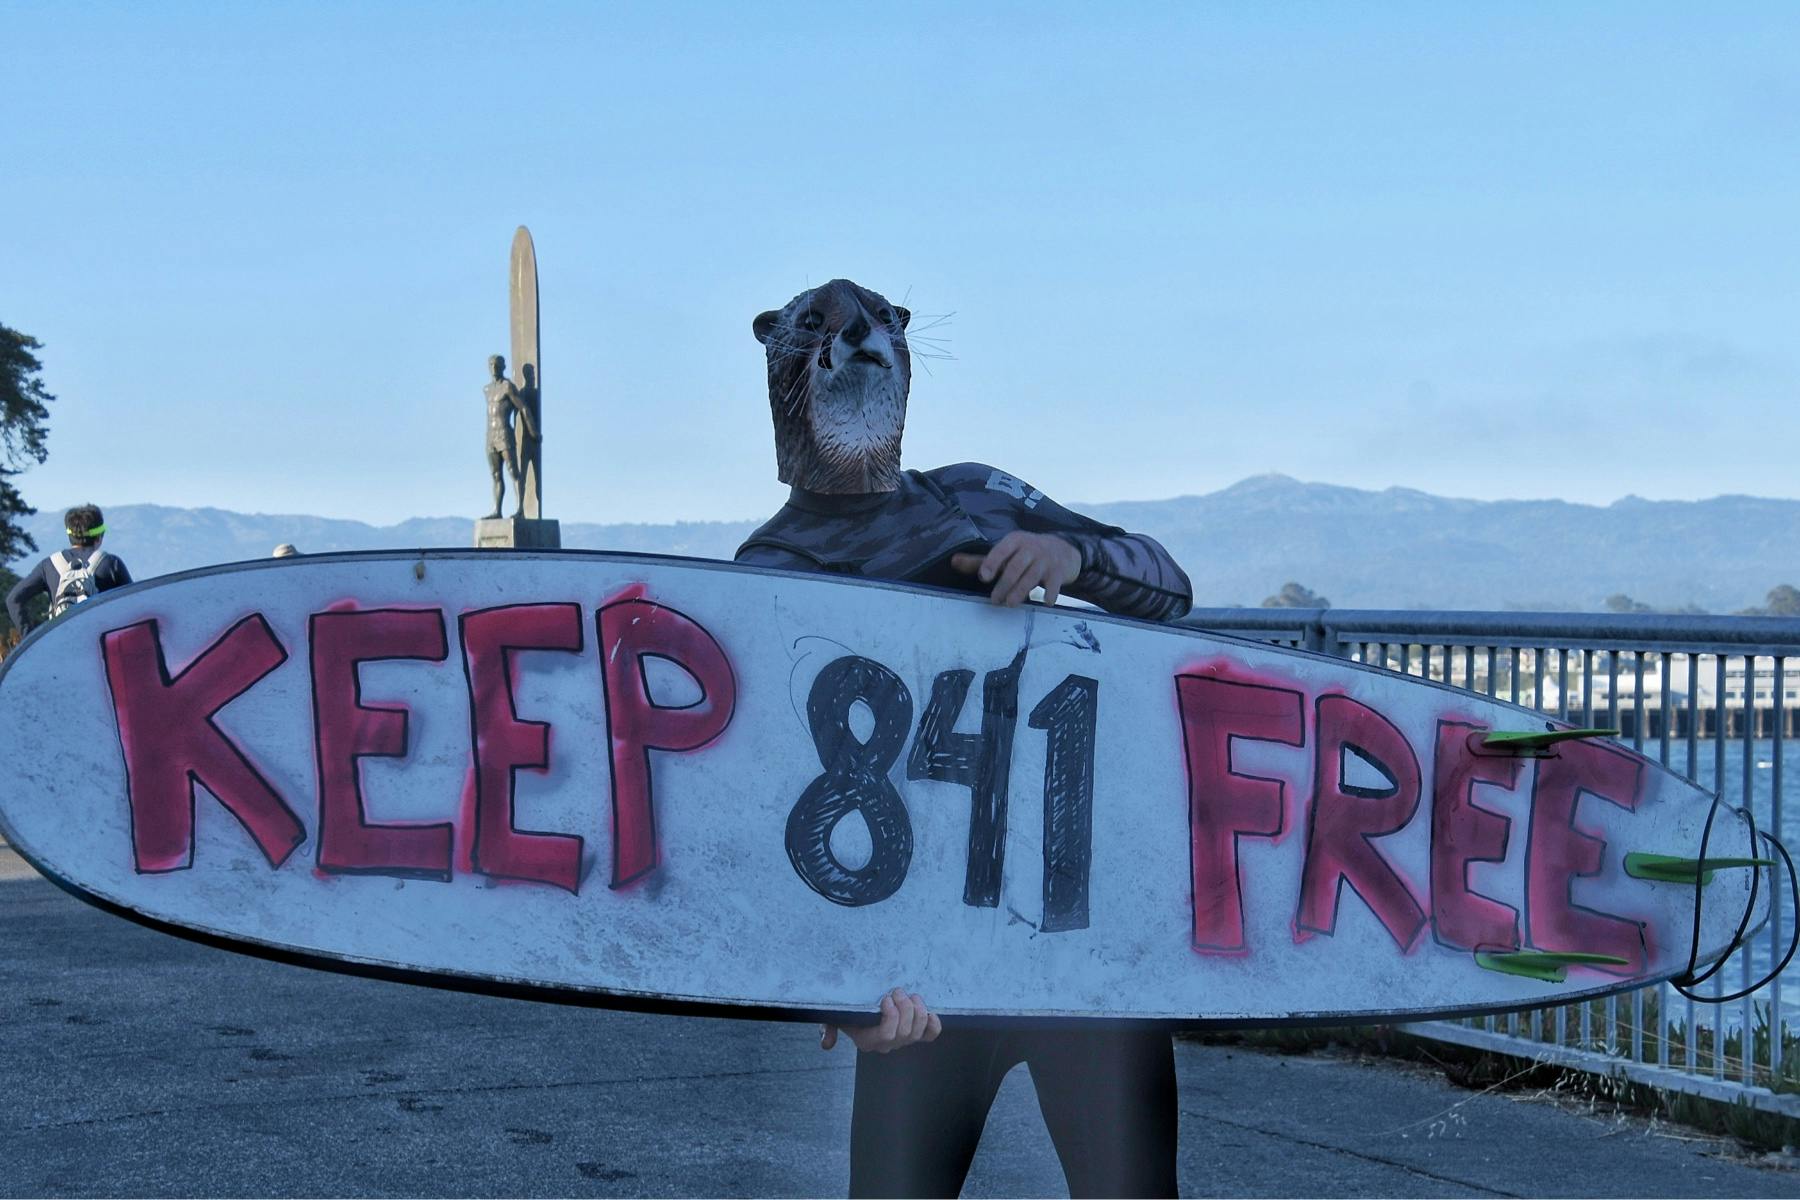 A surfer wearing an otter mask holds up a surfboard the reads 'Keep 841 Free'